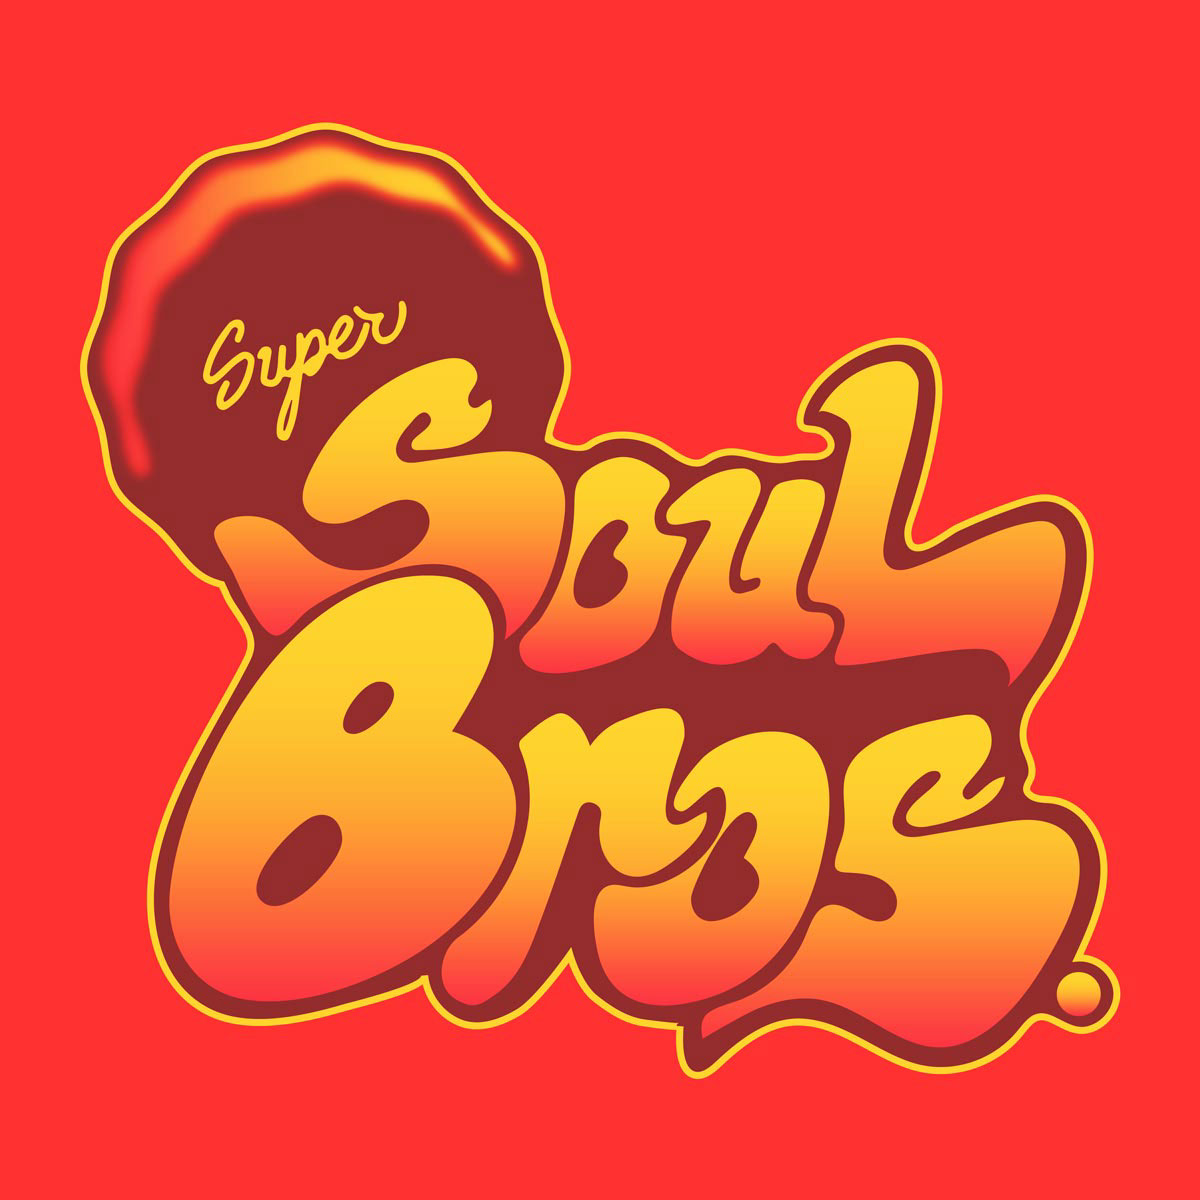 super soul Bros blaxploitation typography   graphicdesign groovy warm colors 70s